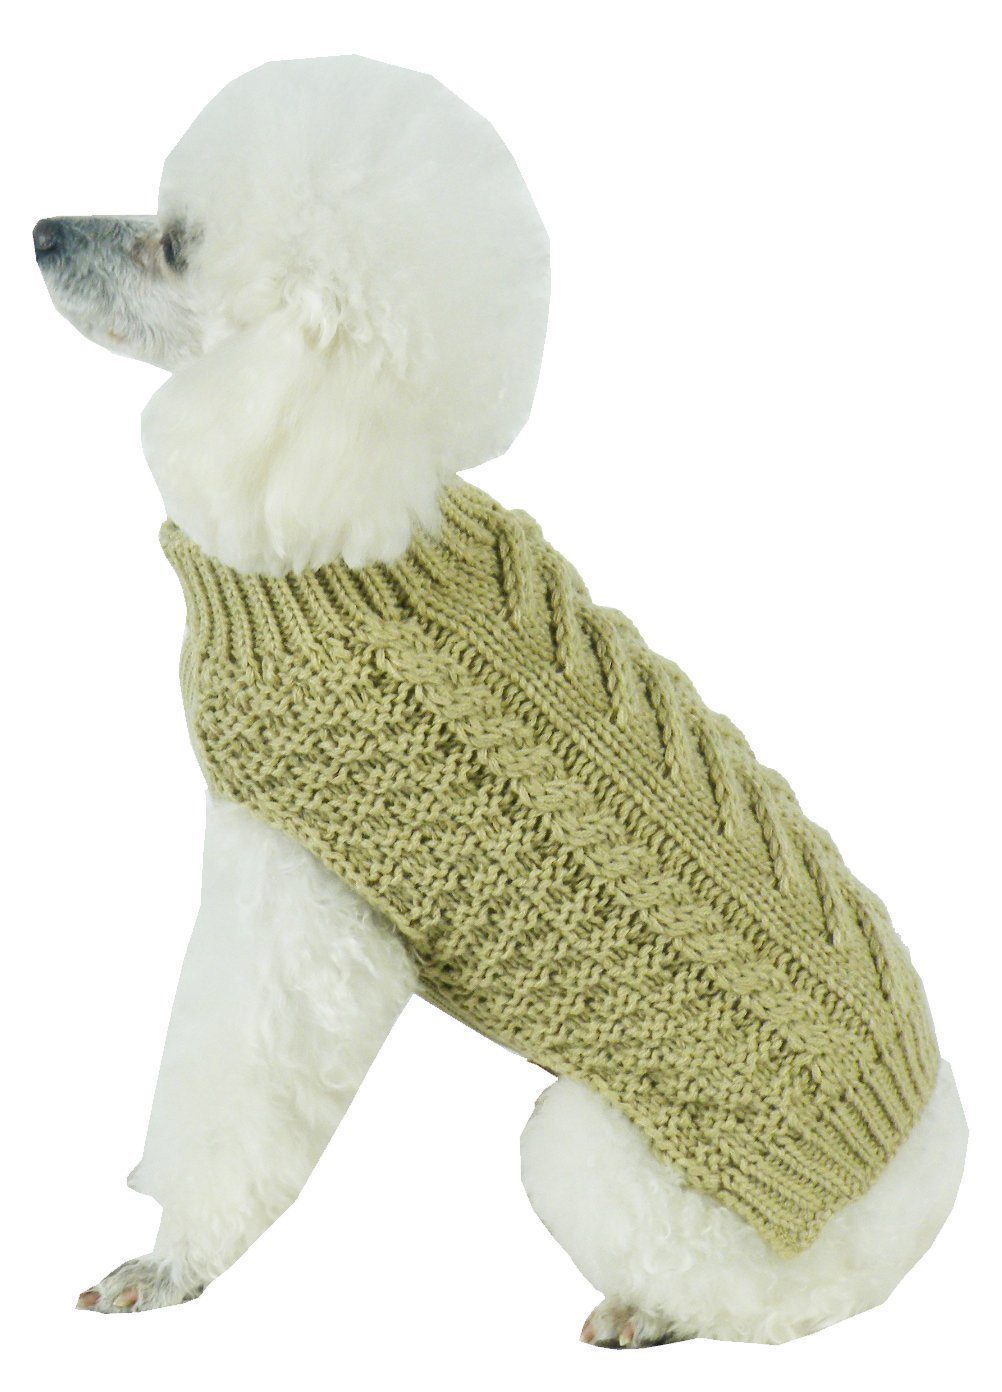 Pet Life ® 'Swivel-Swirl' Heavy Cable Knitted Fashion Designer Dog Sweater X-Small Tan Brown